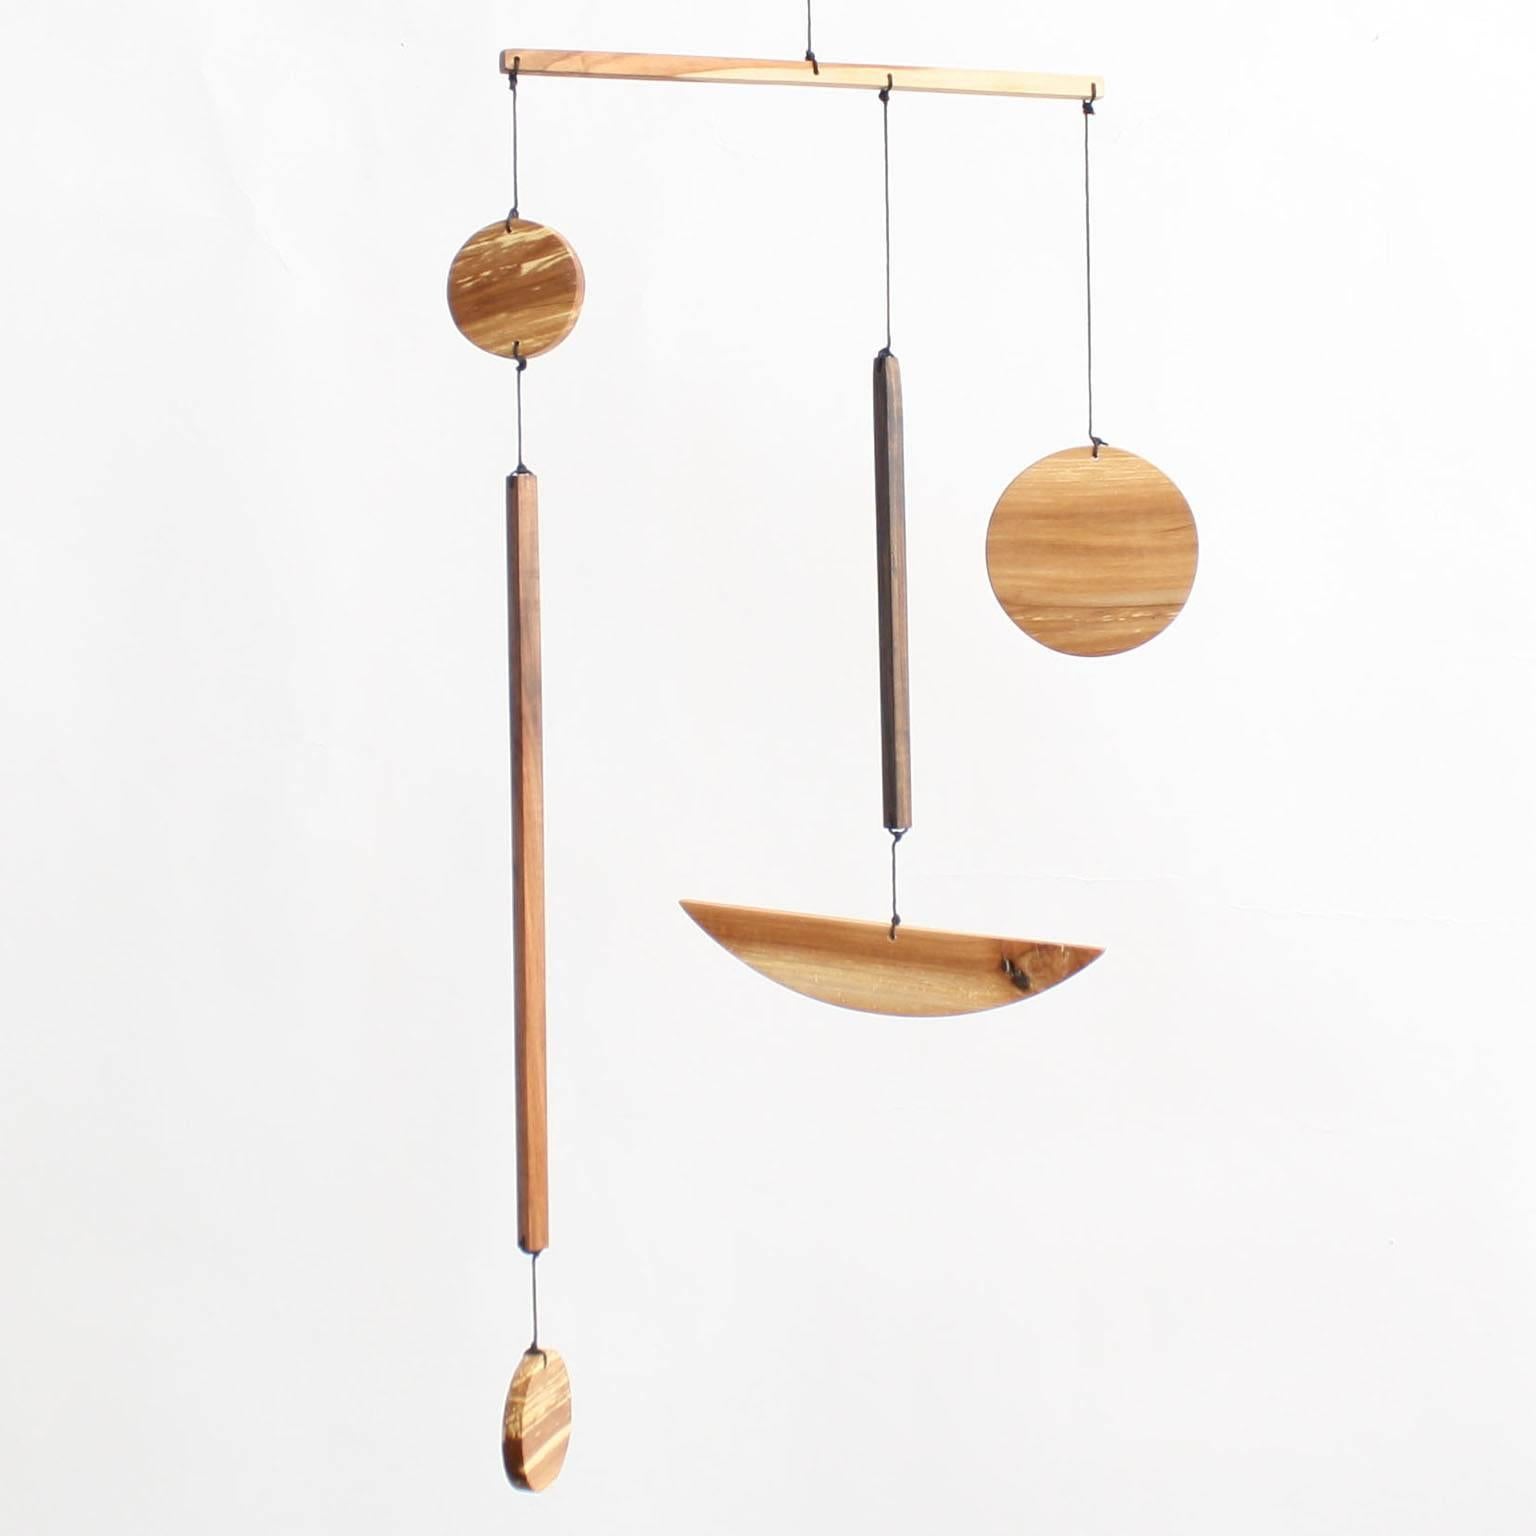 Fort Makers apple medium B Mobile is made in Brooklyn by Noah Spencer. His wooden Kinetic sculptures explore organic and linear form and touch upon a human fascination with the universe.

Materials: Apple wood, wax string with end loop for hanging.